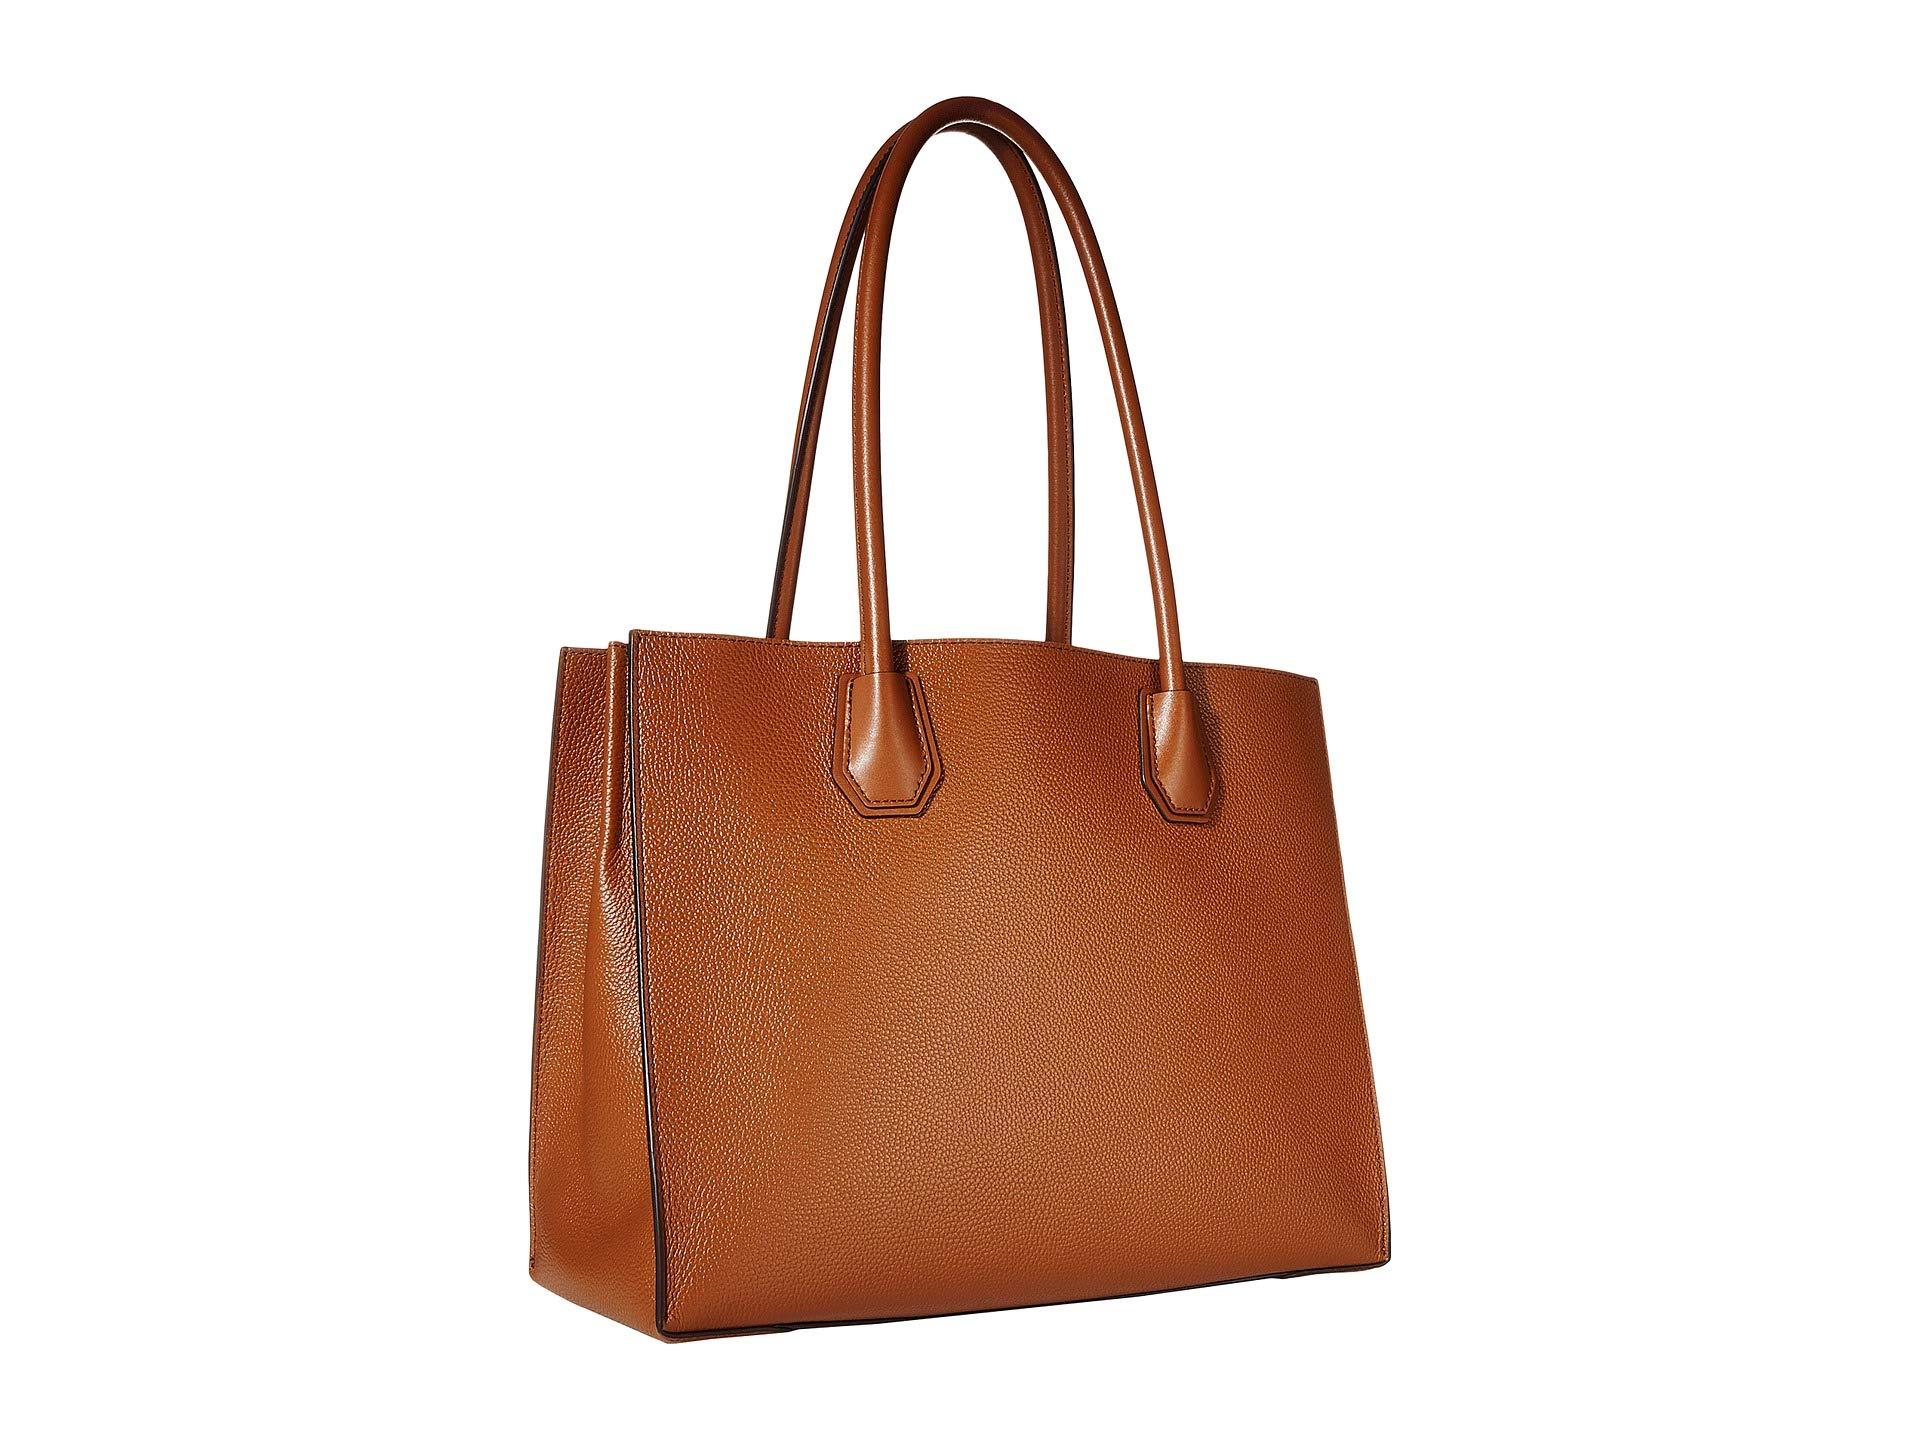 MICHAEL Michael Kors Leather Mercer Extra Large Pocket Tote in Brown - Lyst